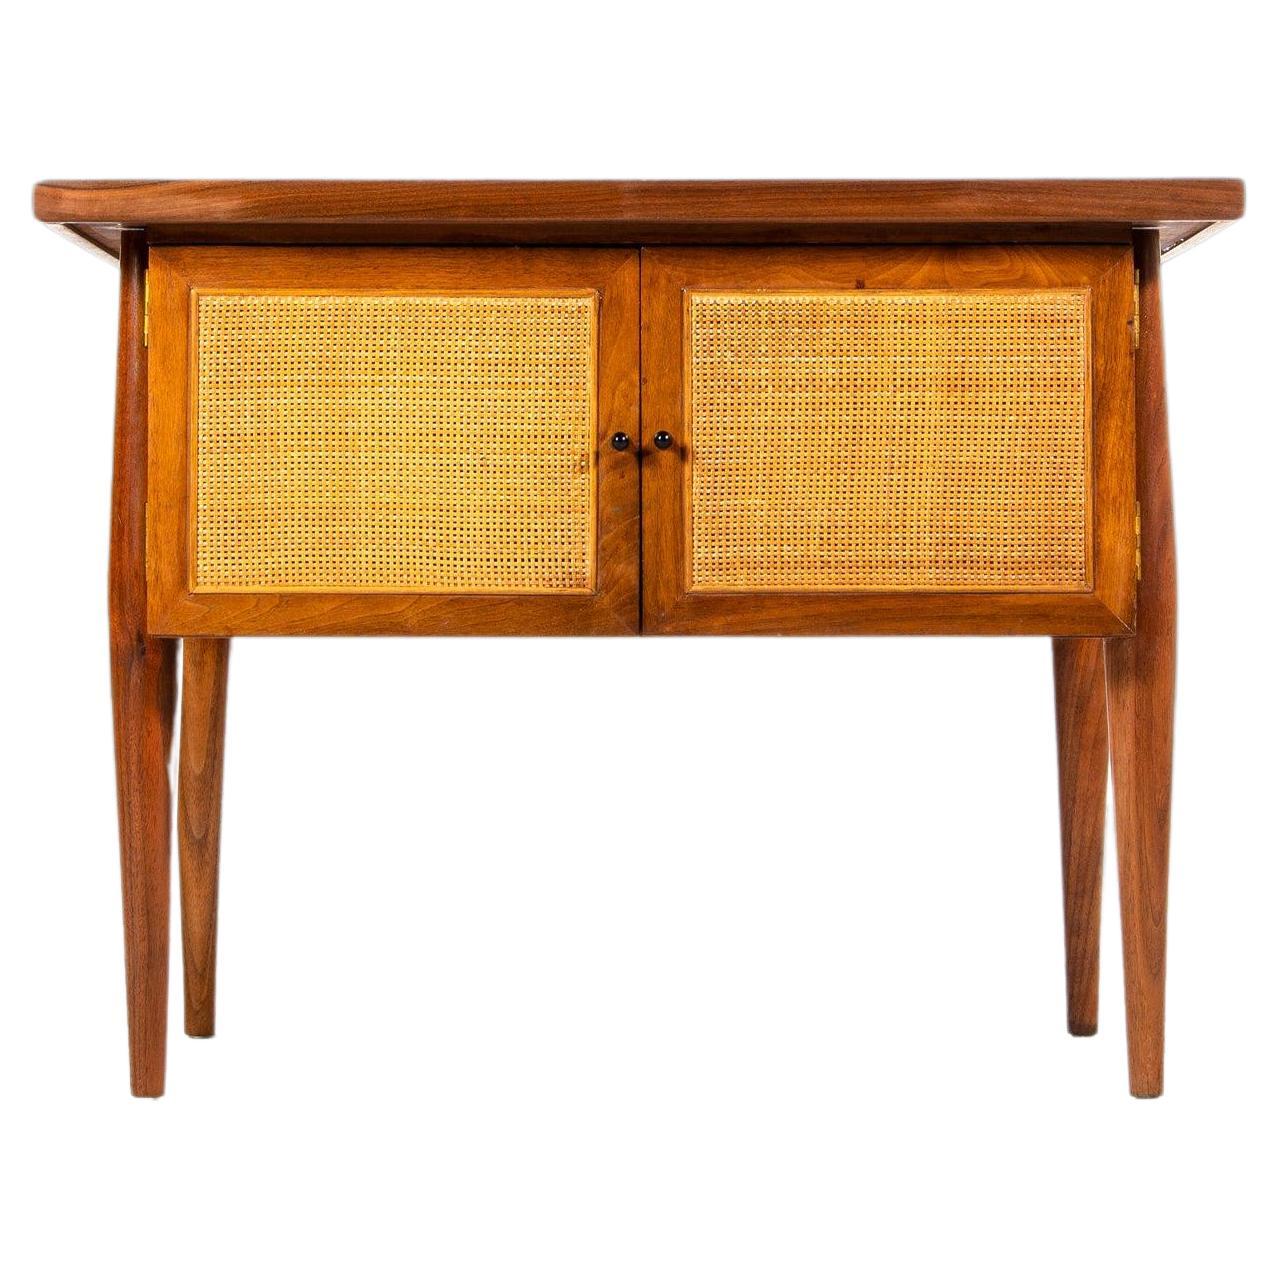 End Table Table in Cane and Walnut by Jack Cartwright for Founders, USA, c 1960s